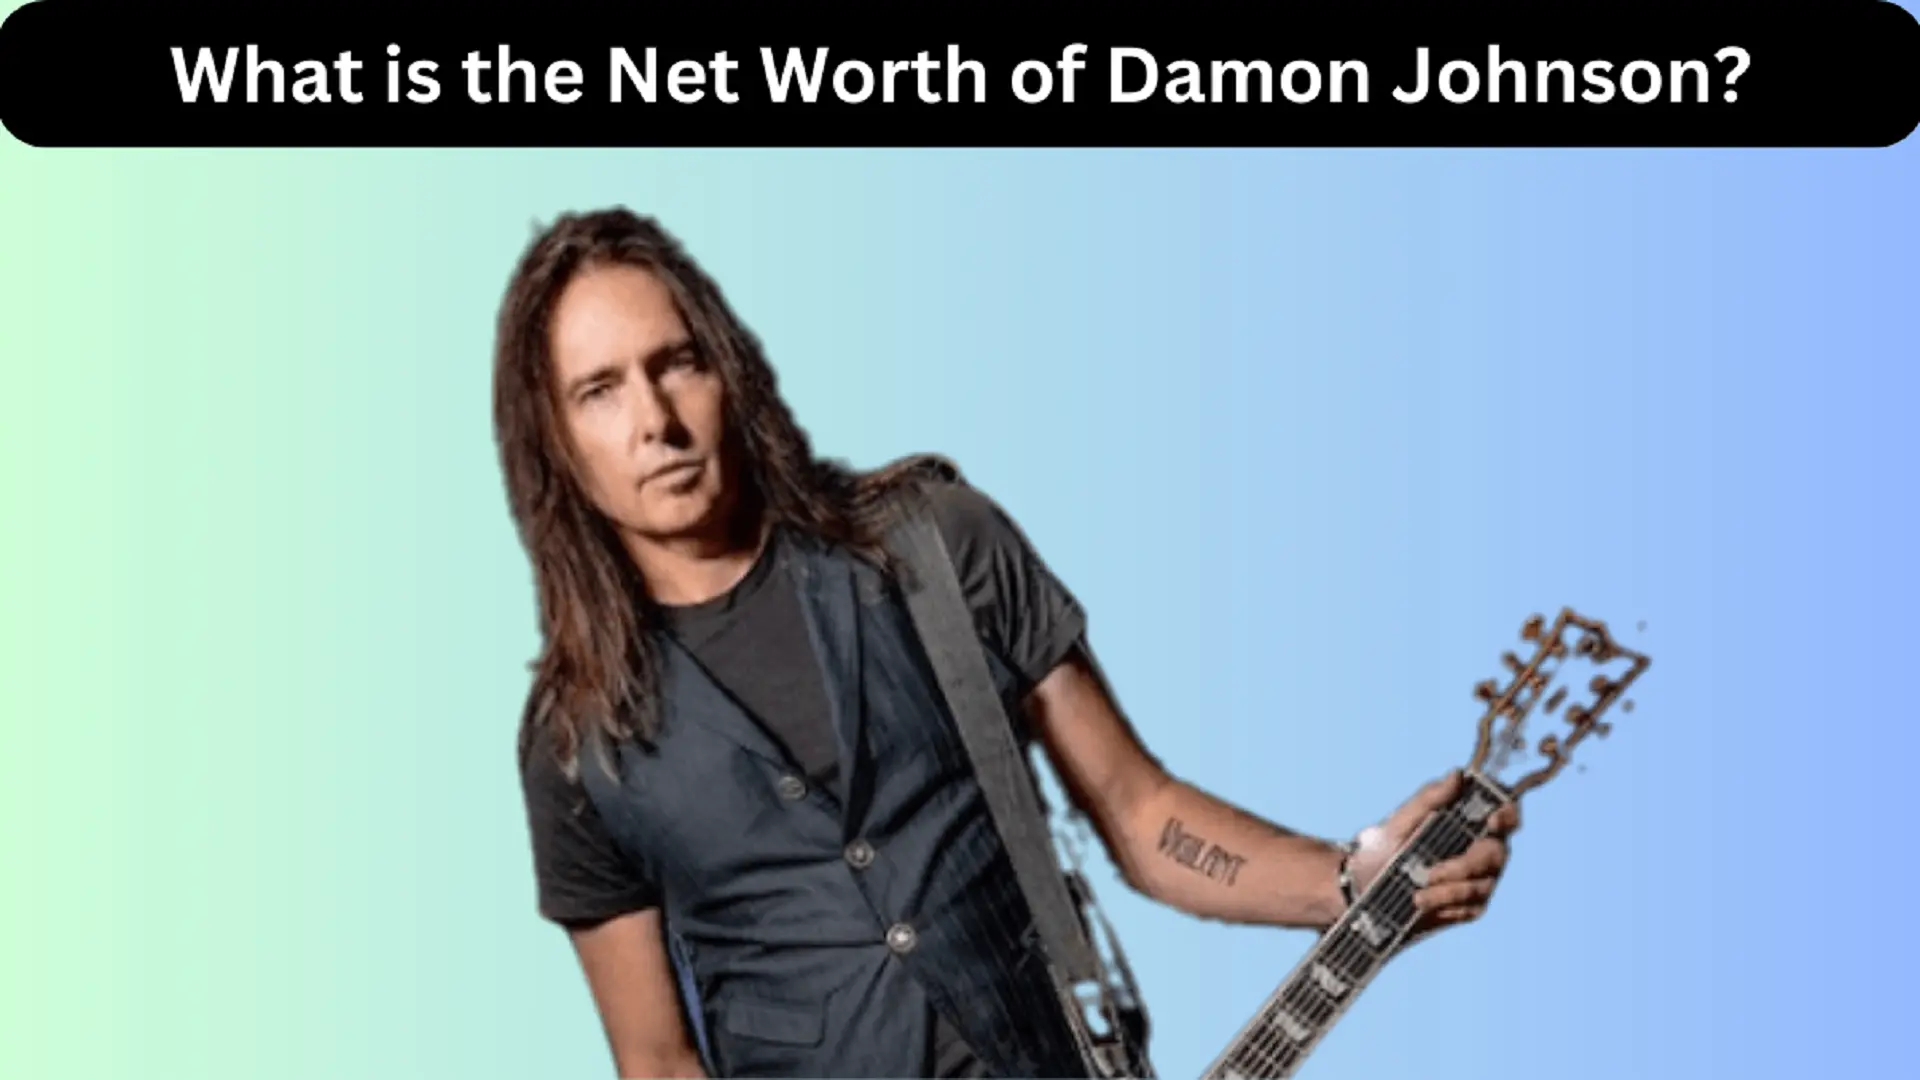 What is the Net Worth of Damon Johnson